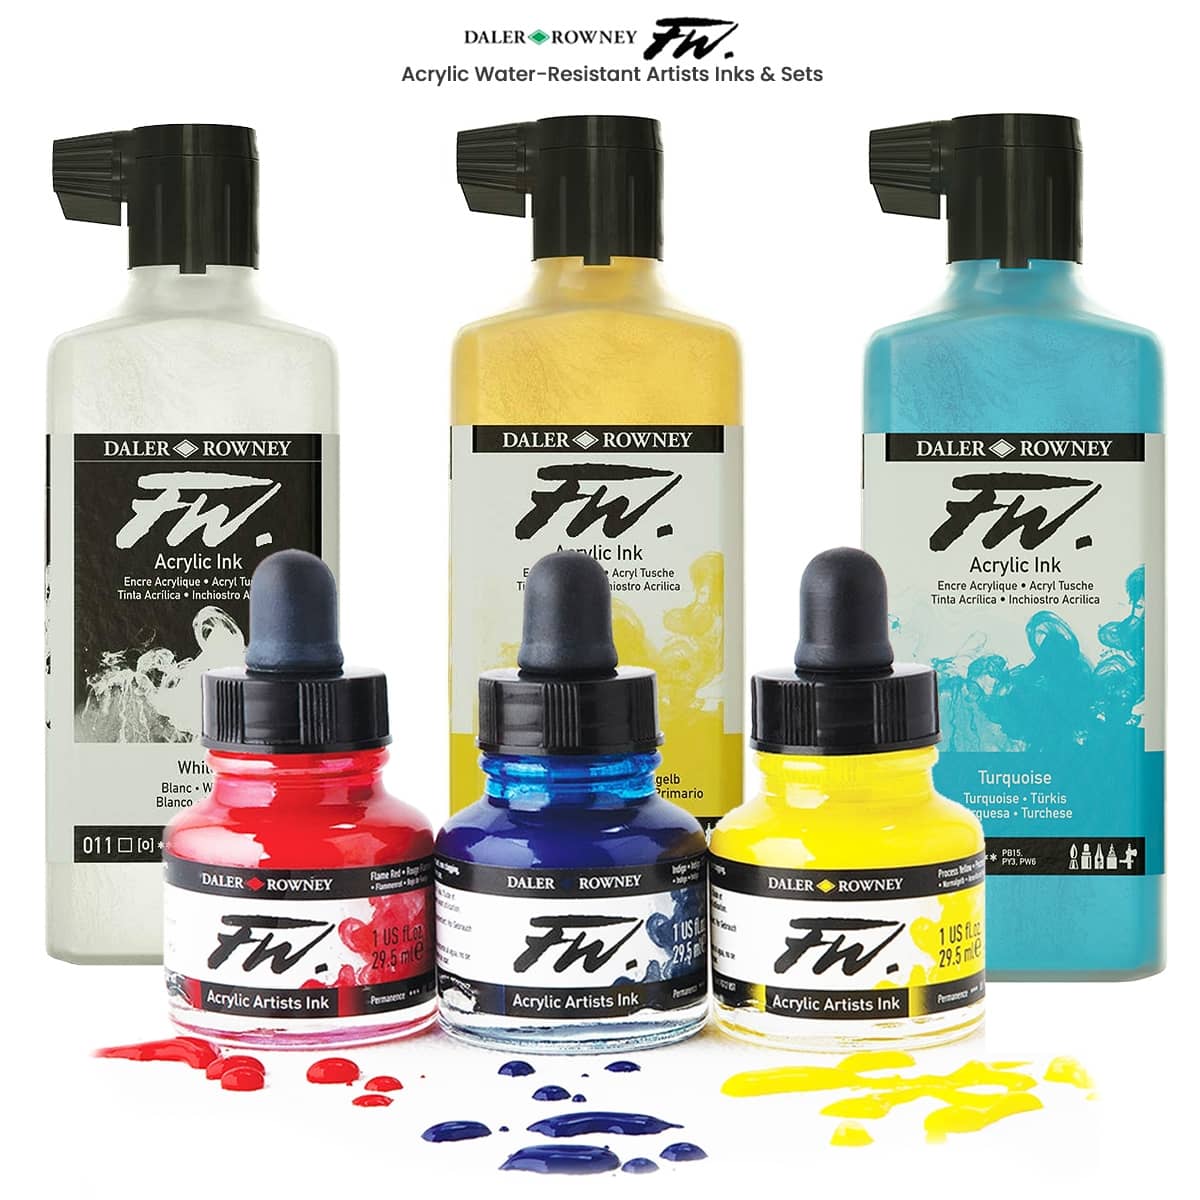 Daler-Rowney FW Acrylic Water-Resistant Artists Ink Sets